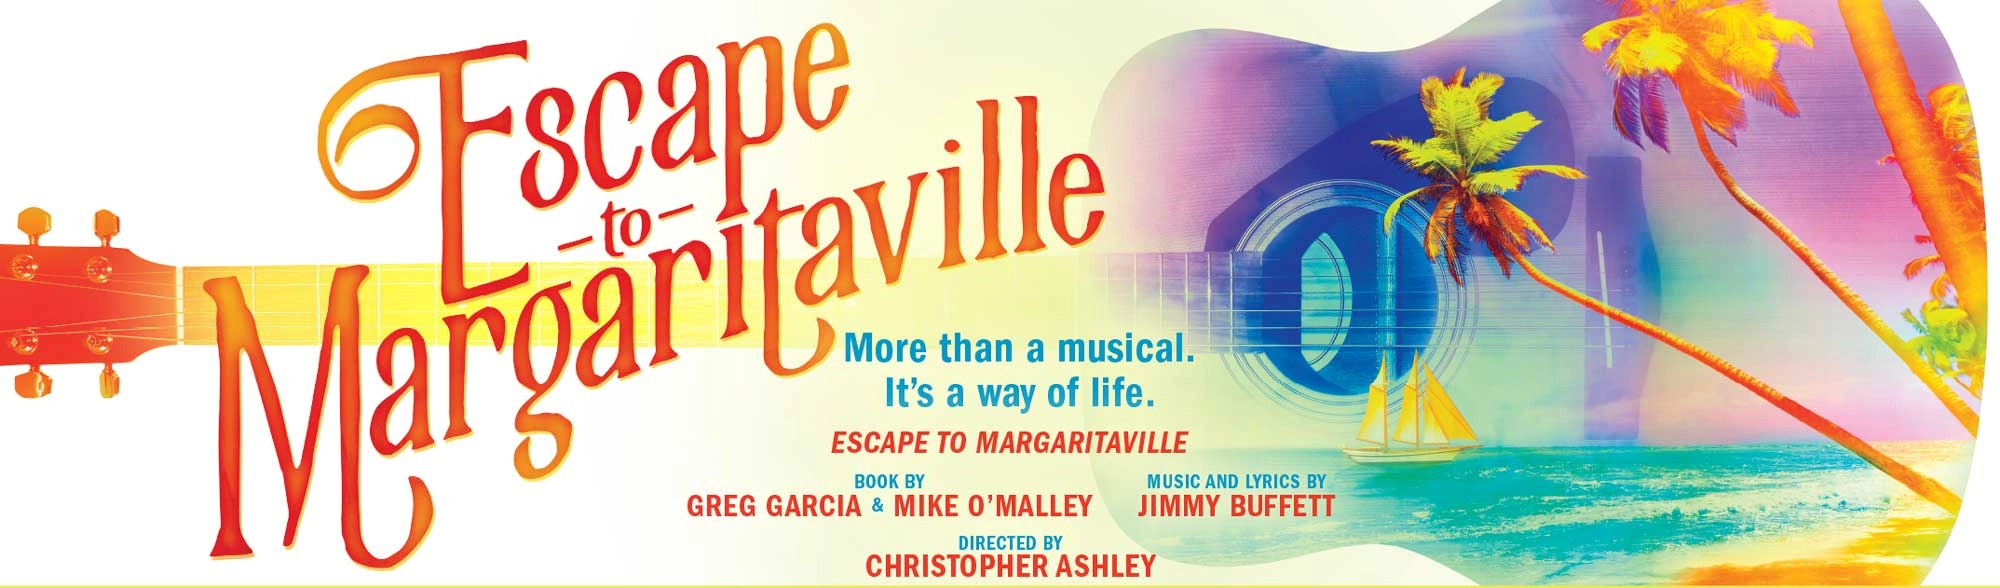 Escape to Margaritaville Musical Embarks on National Tour